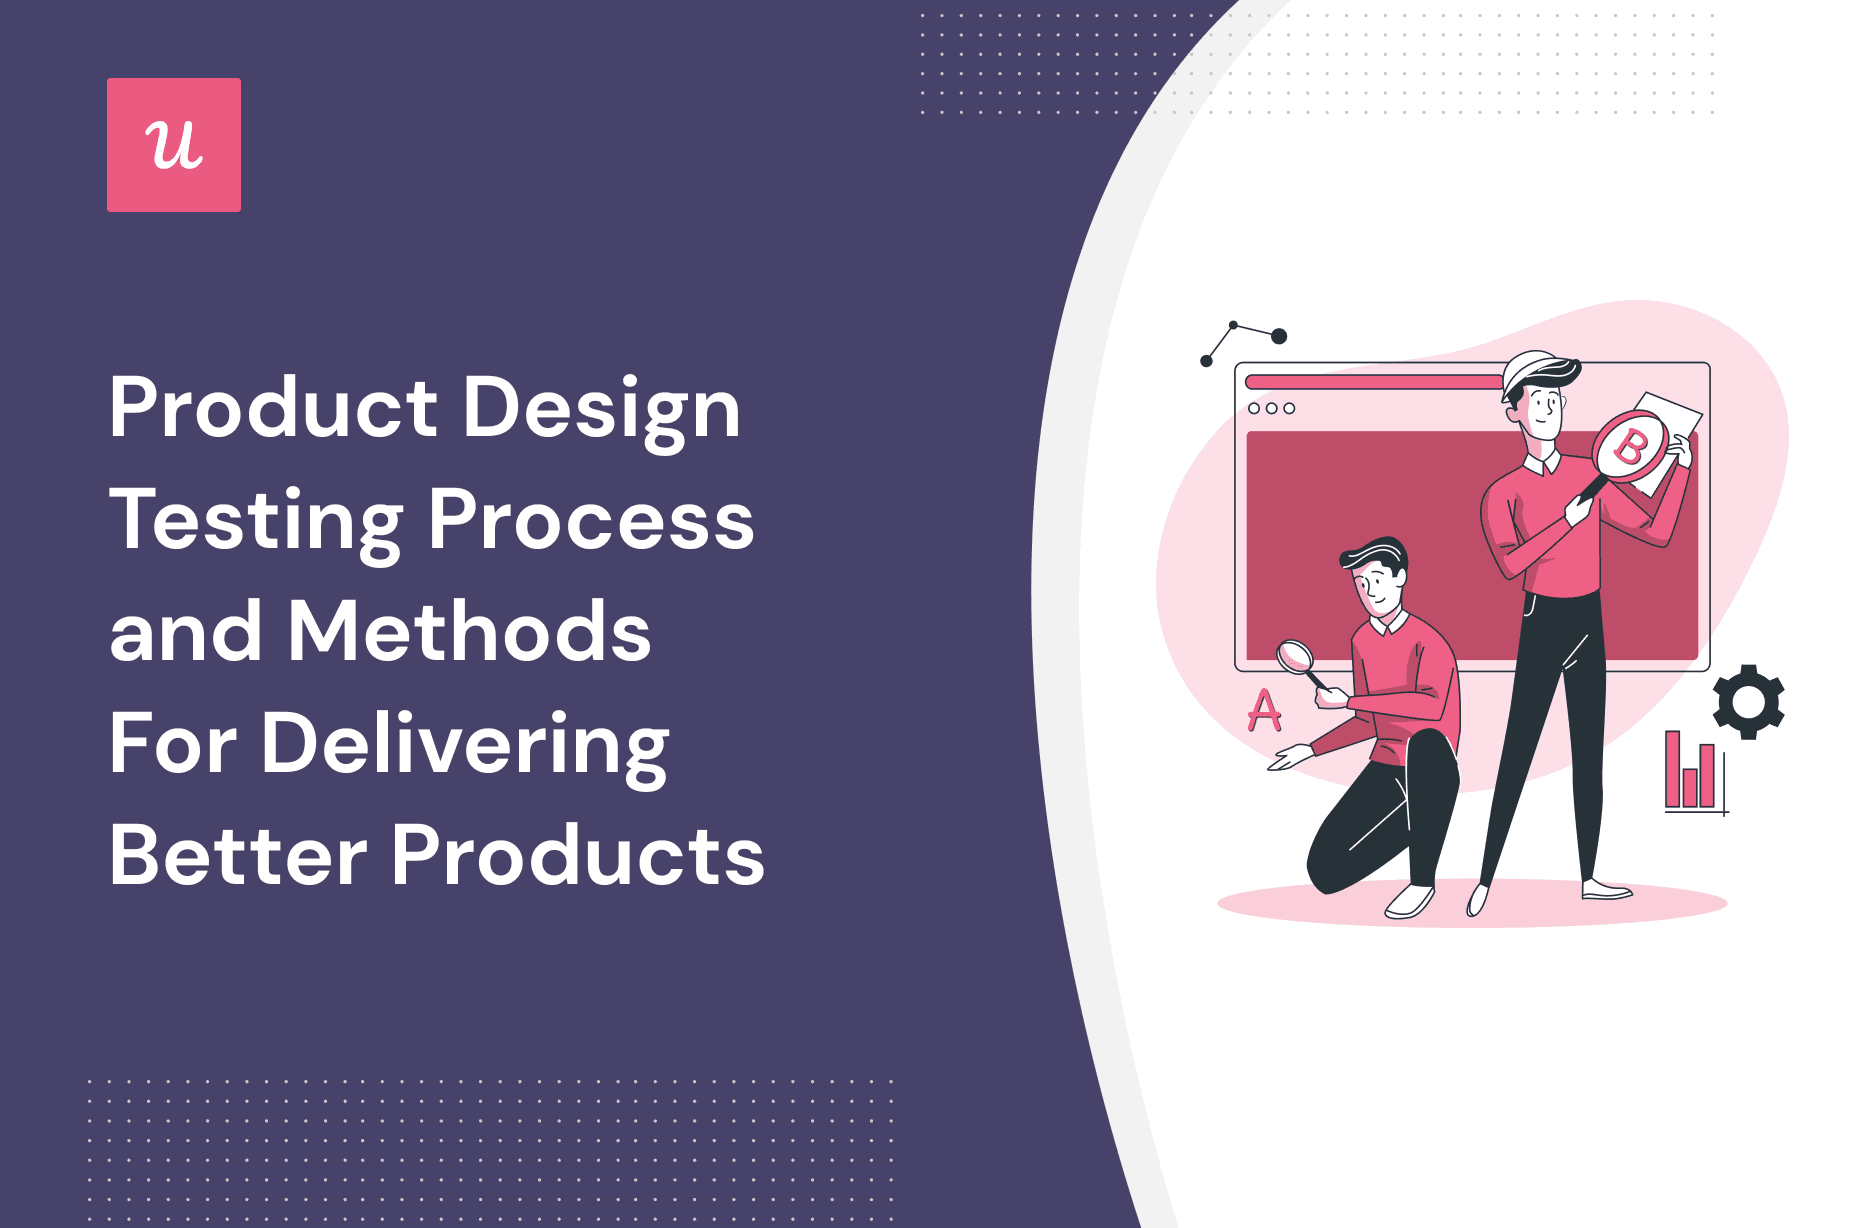 Product Design Testing Process and Methods For Delivering Better Products cover